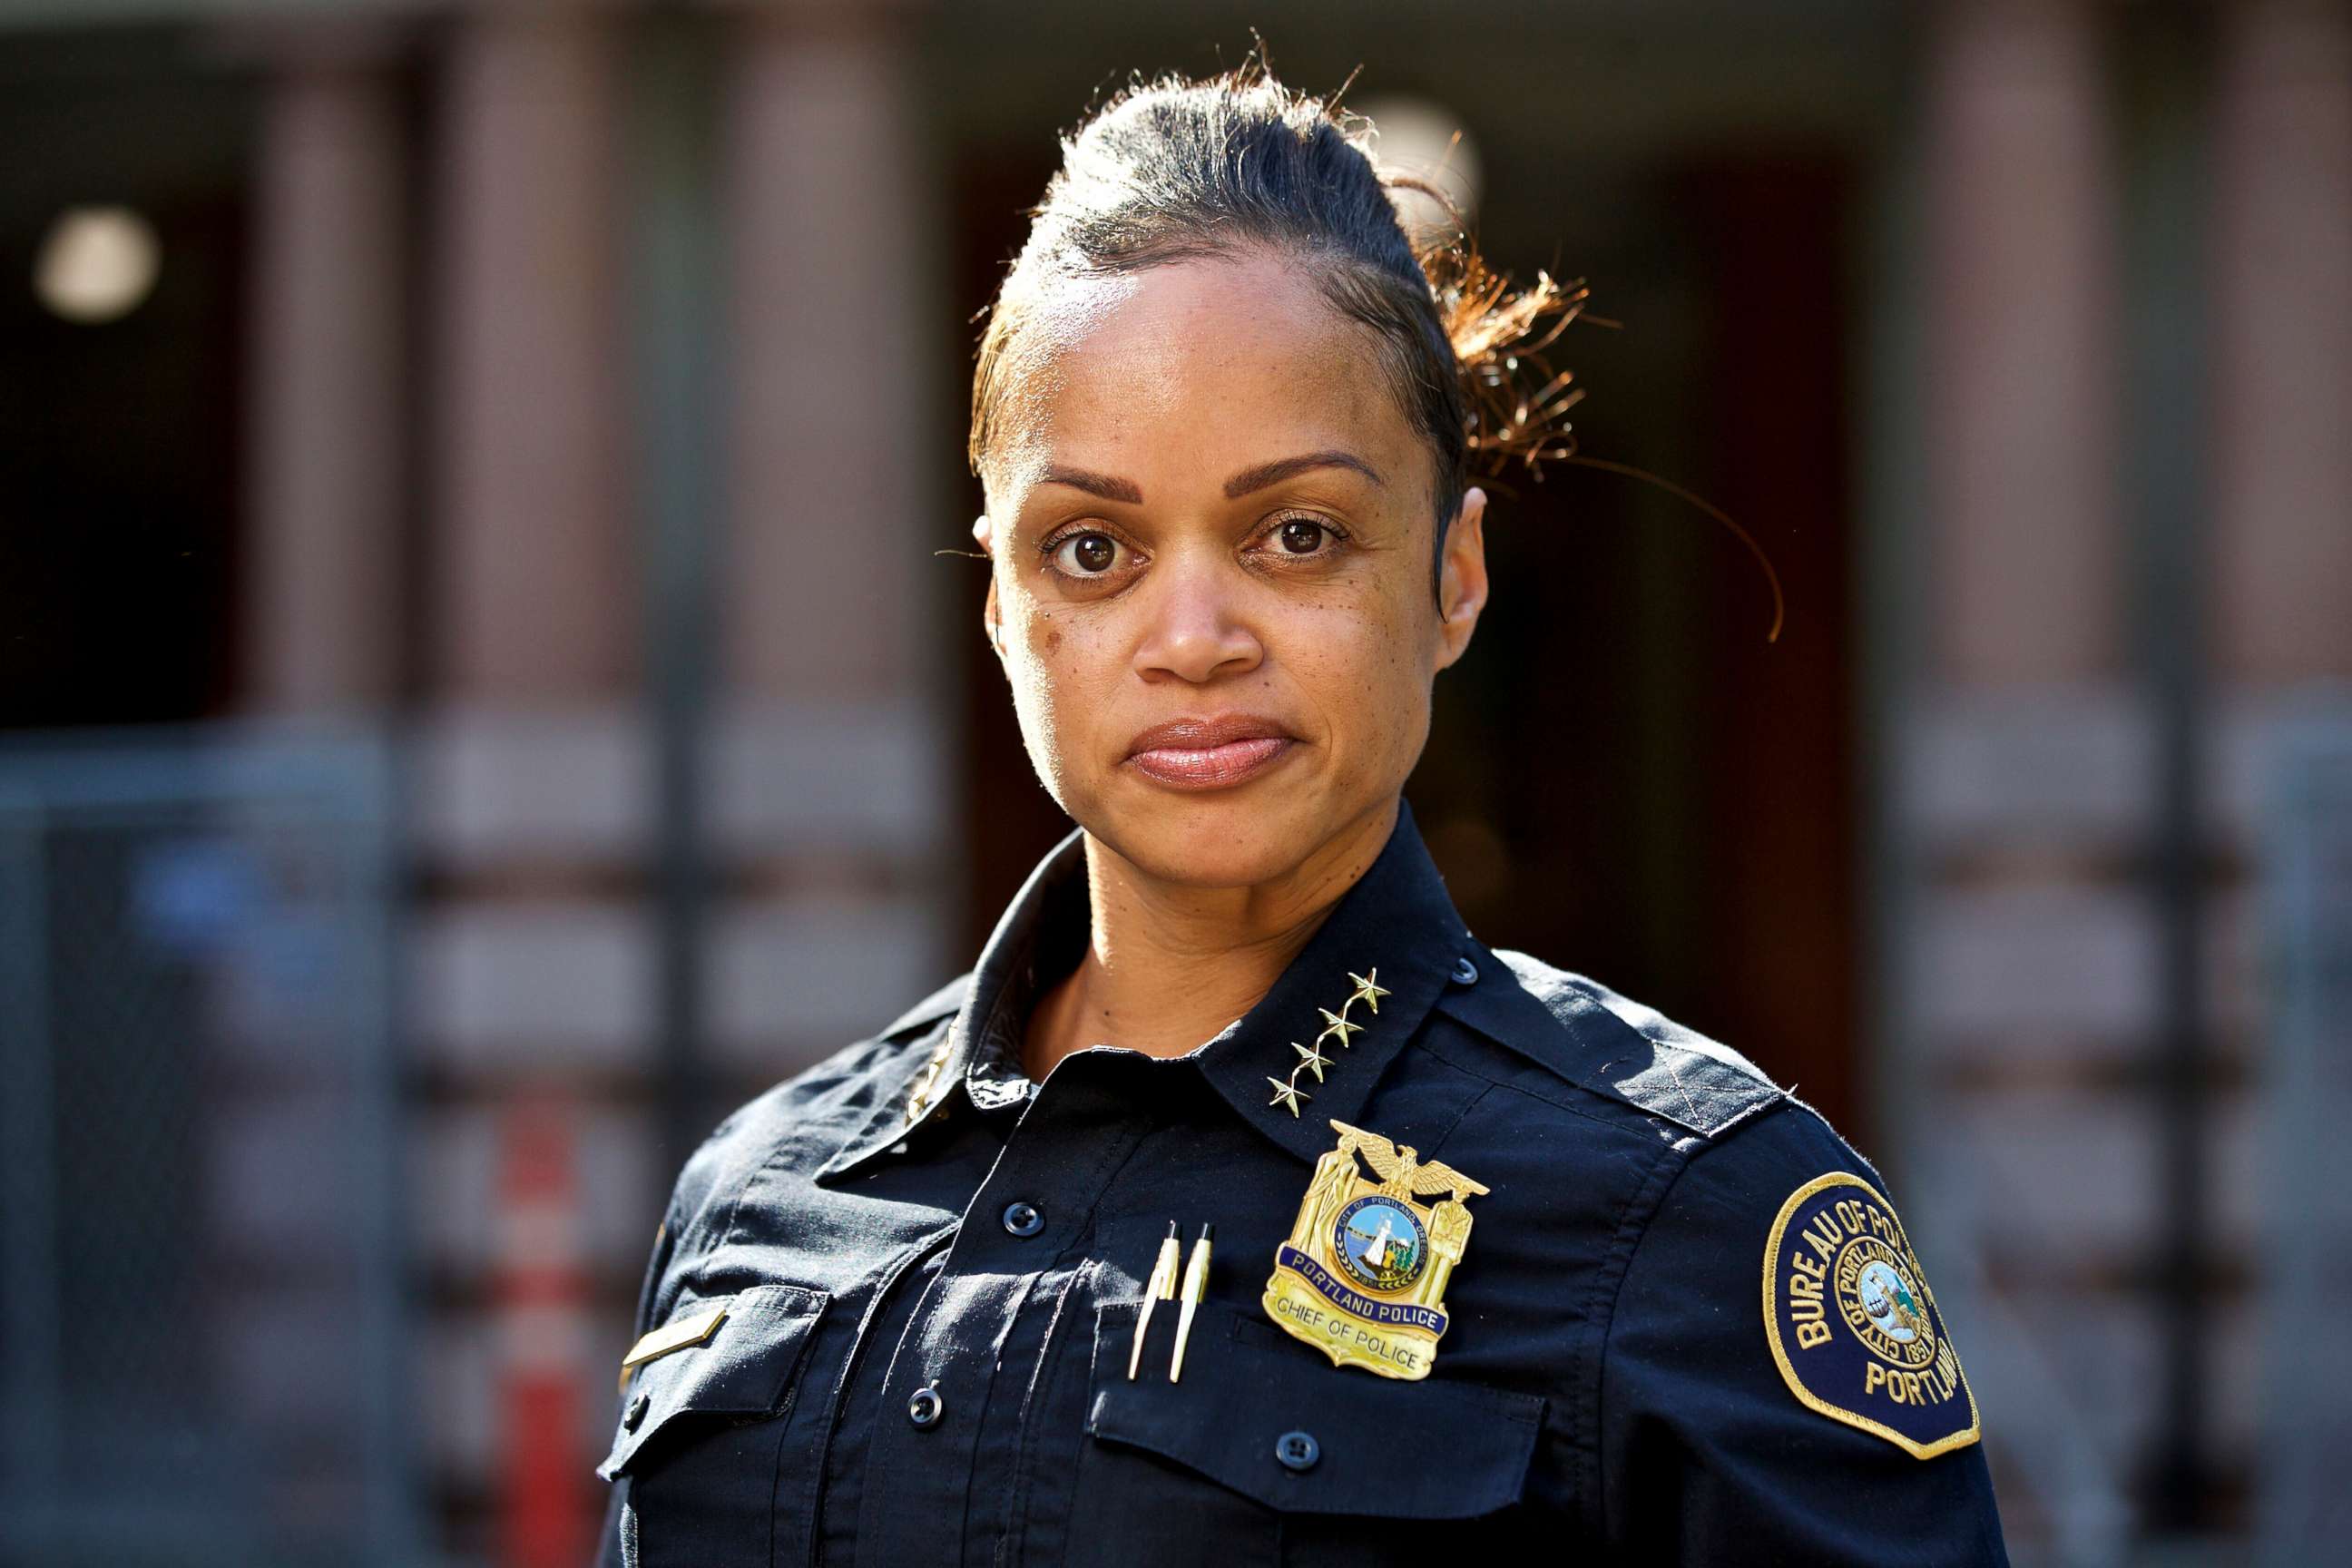 Danielle Outlaw Becomes Philadelphia S 1st Black Woman Police Commissioner Amid City S Recent